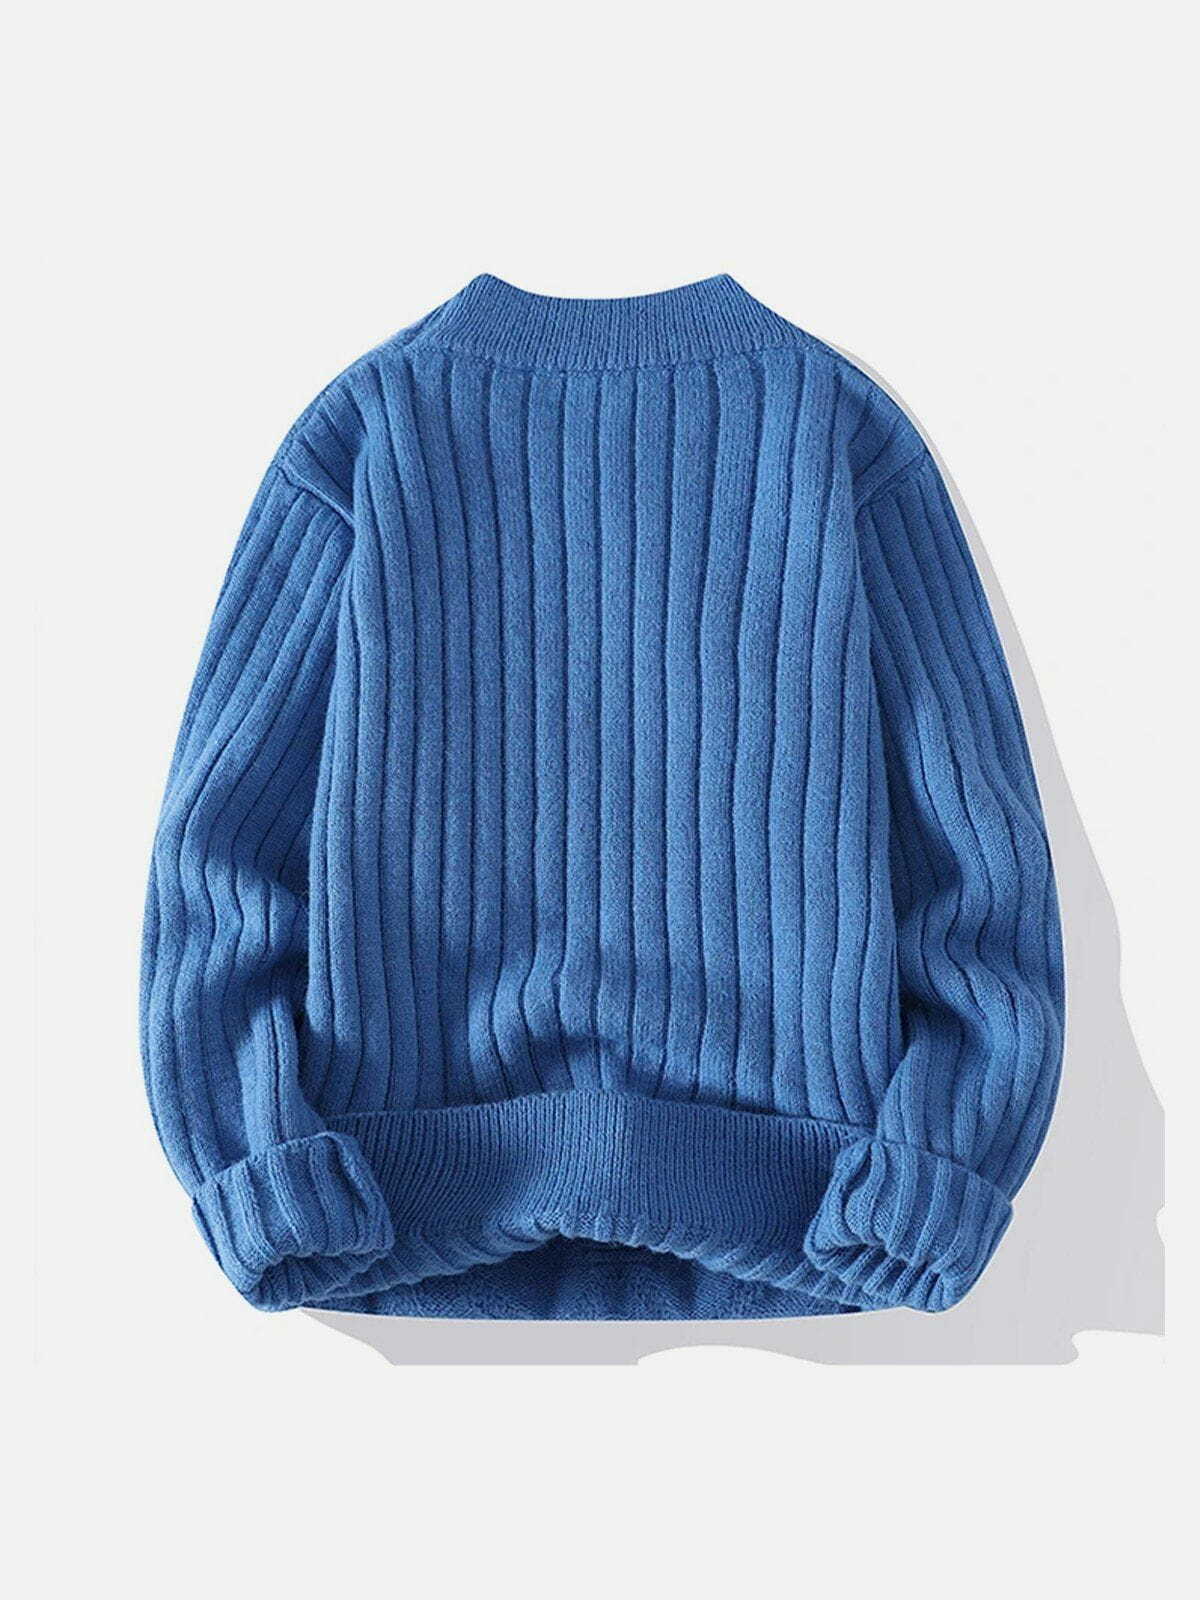 solid color knit sweater edgy streetwear statement 5435